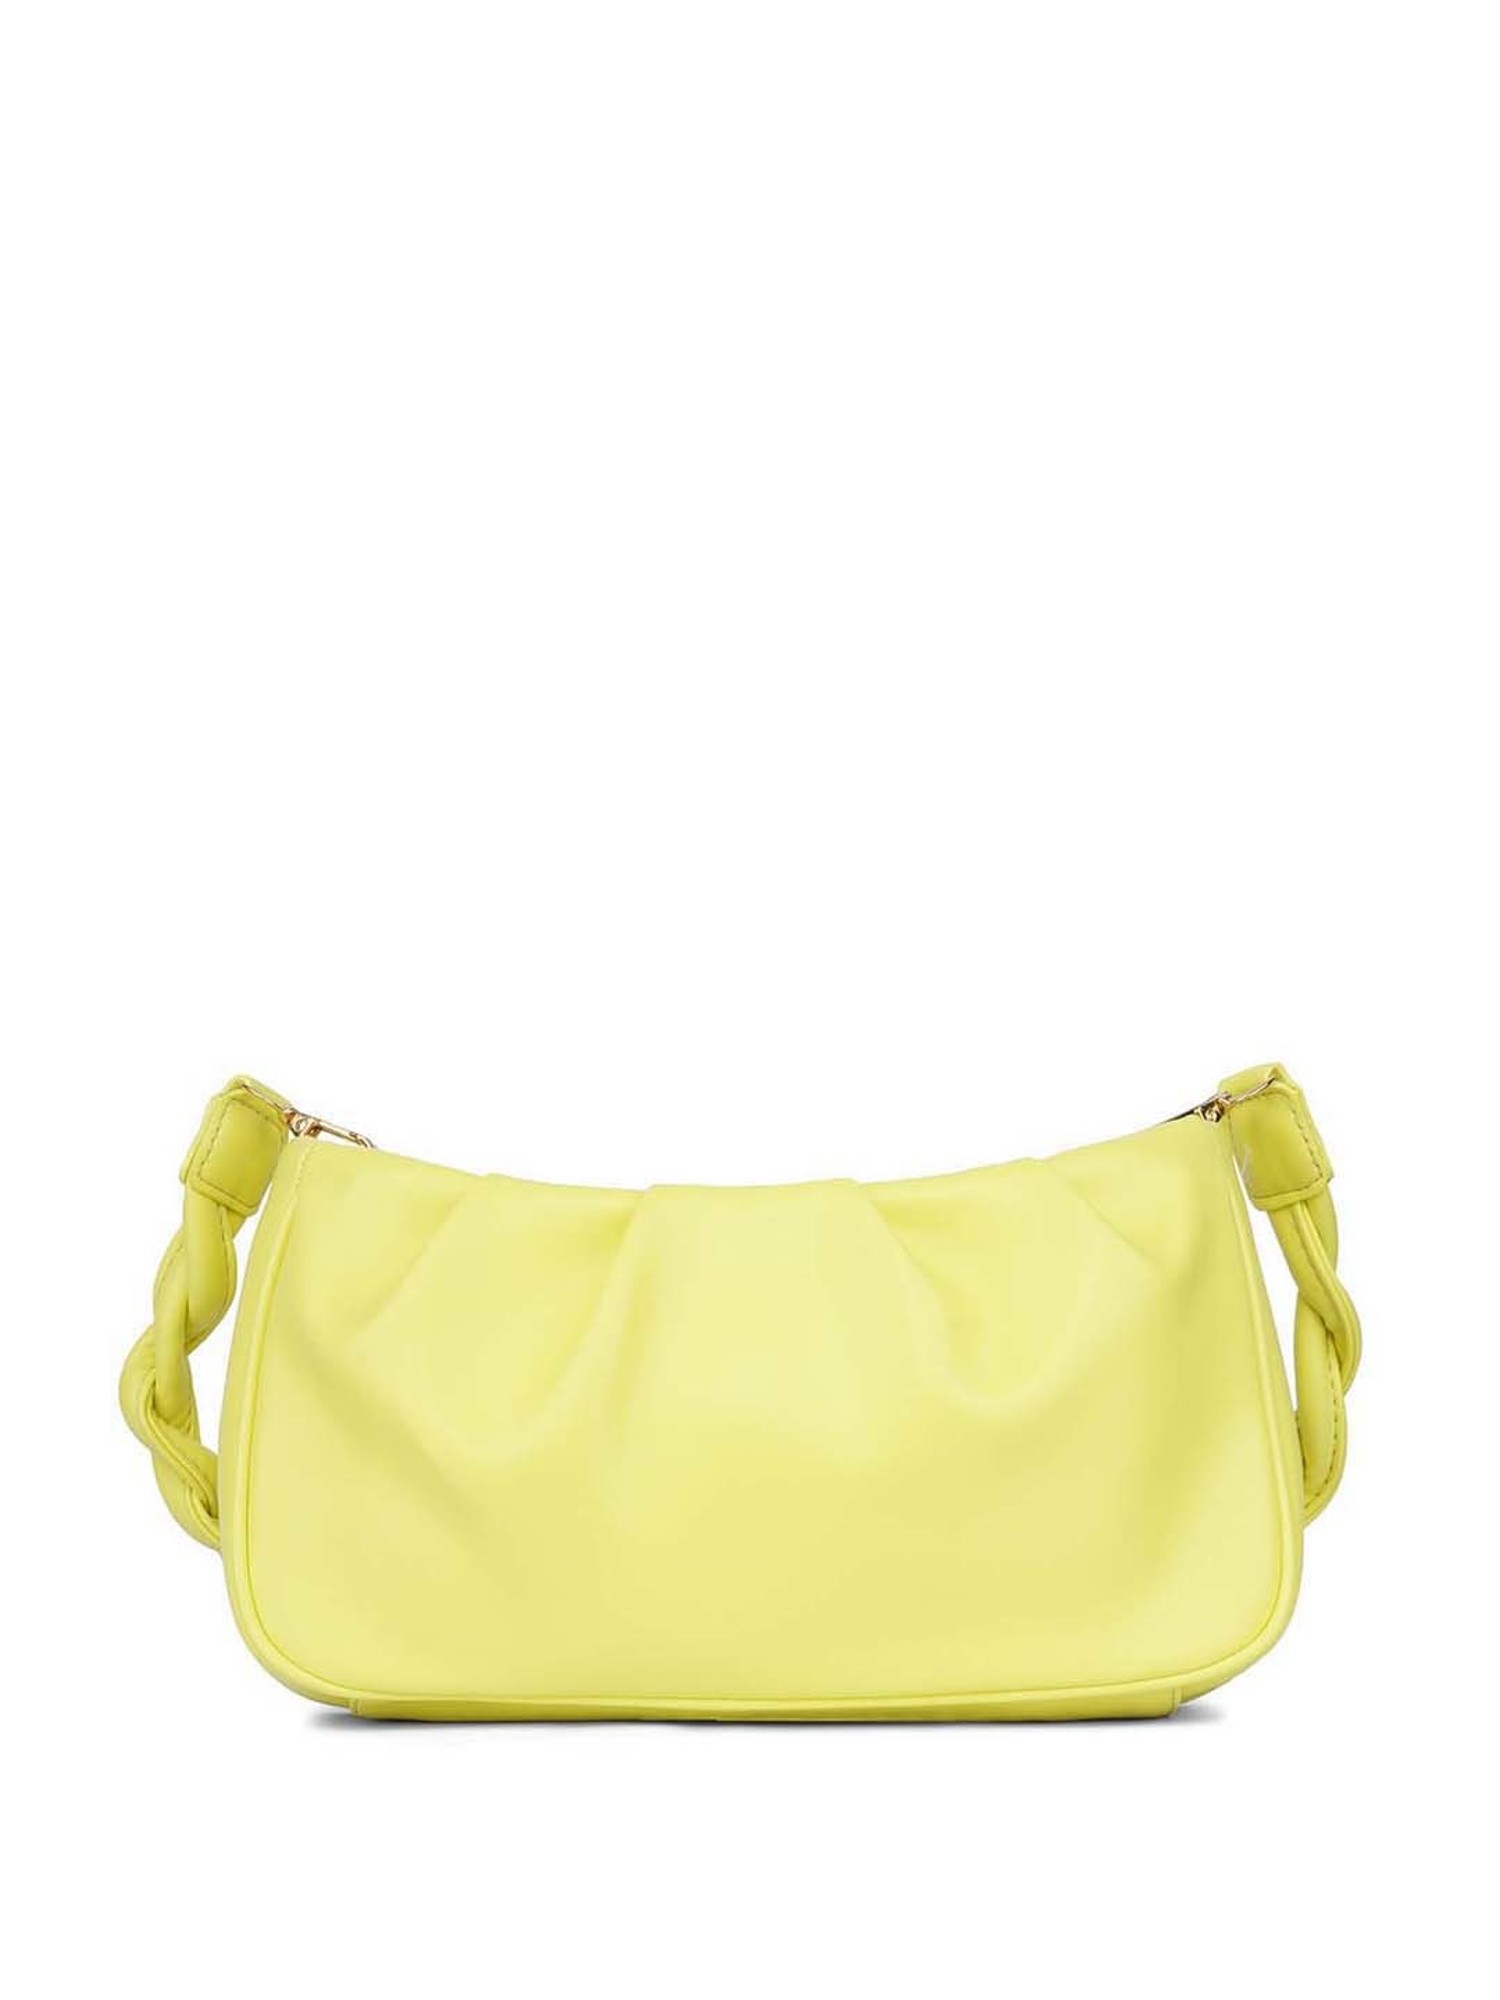 Fastrack Yellow Sling Bag A3047PYL01 Yellow  Price in India  Flipkartcom